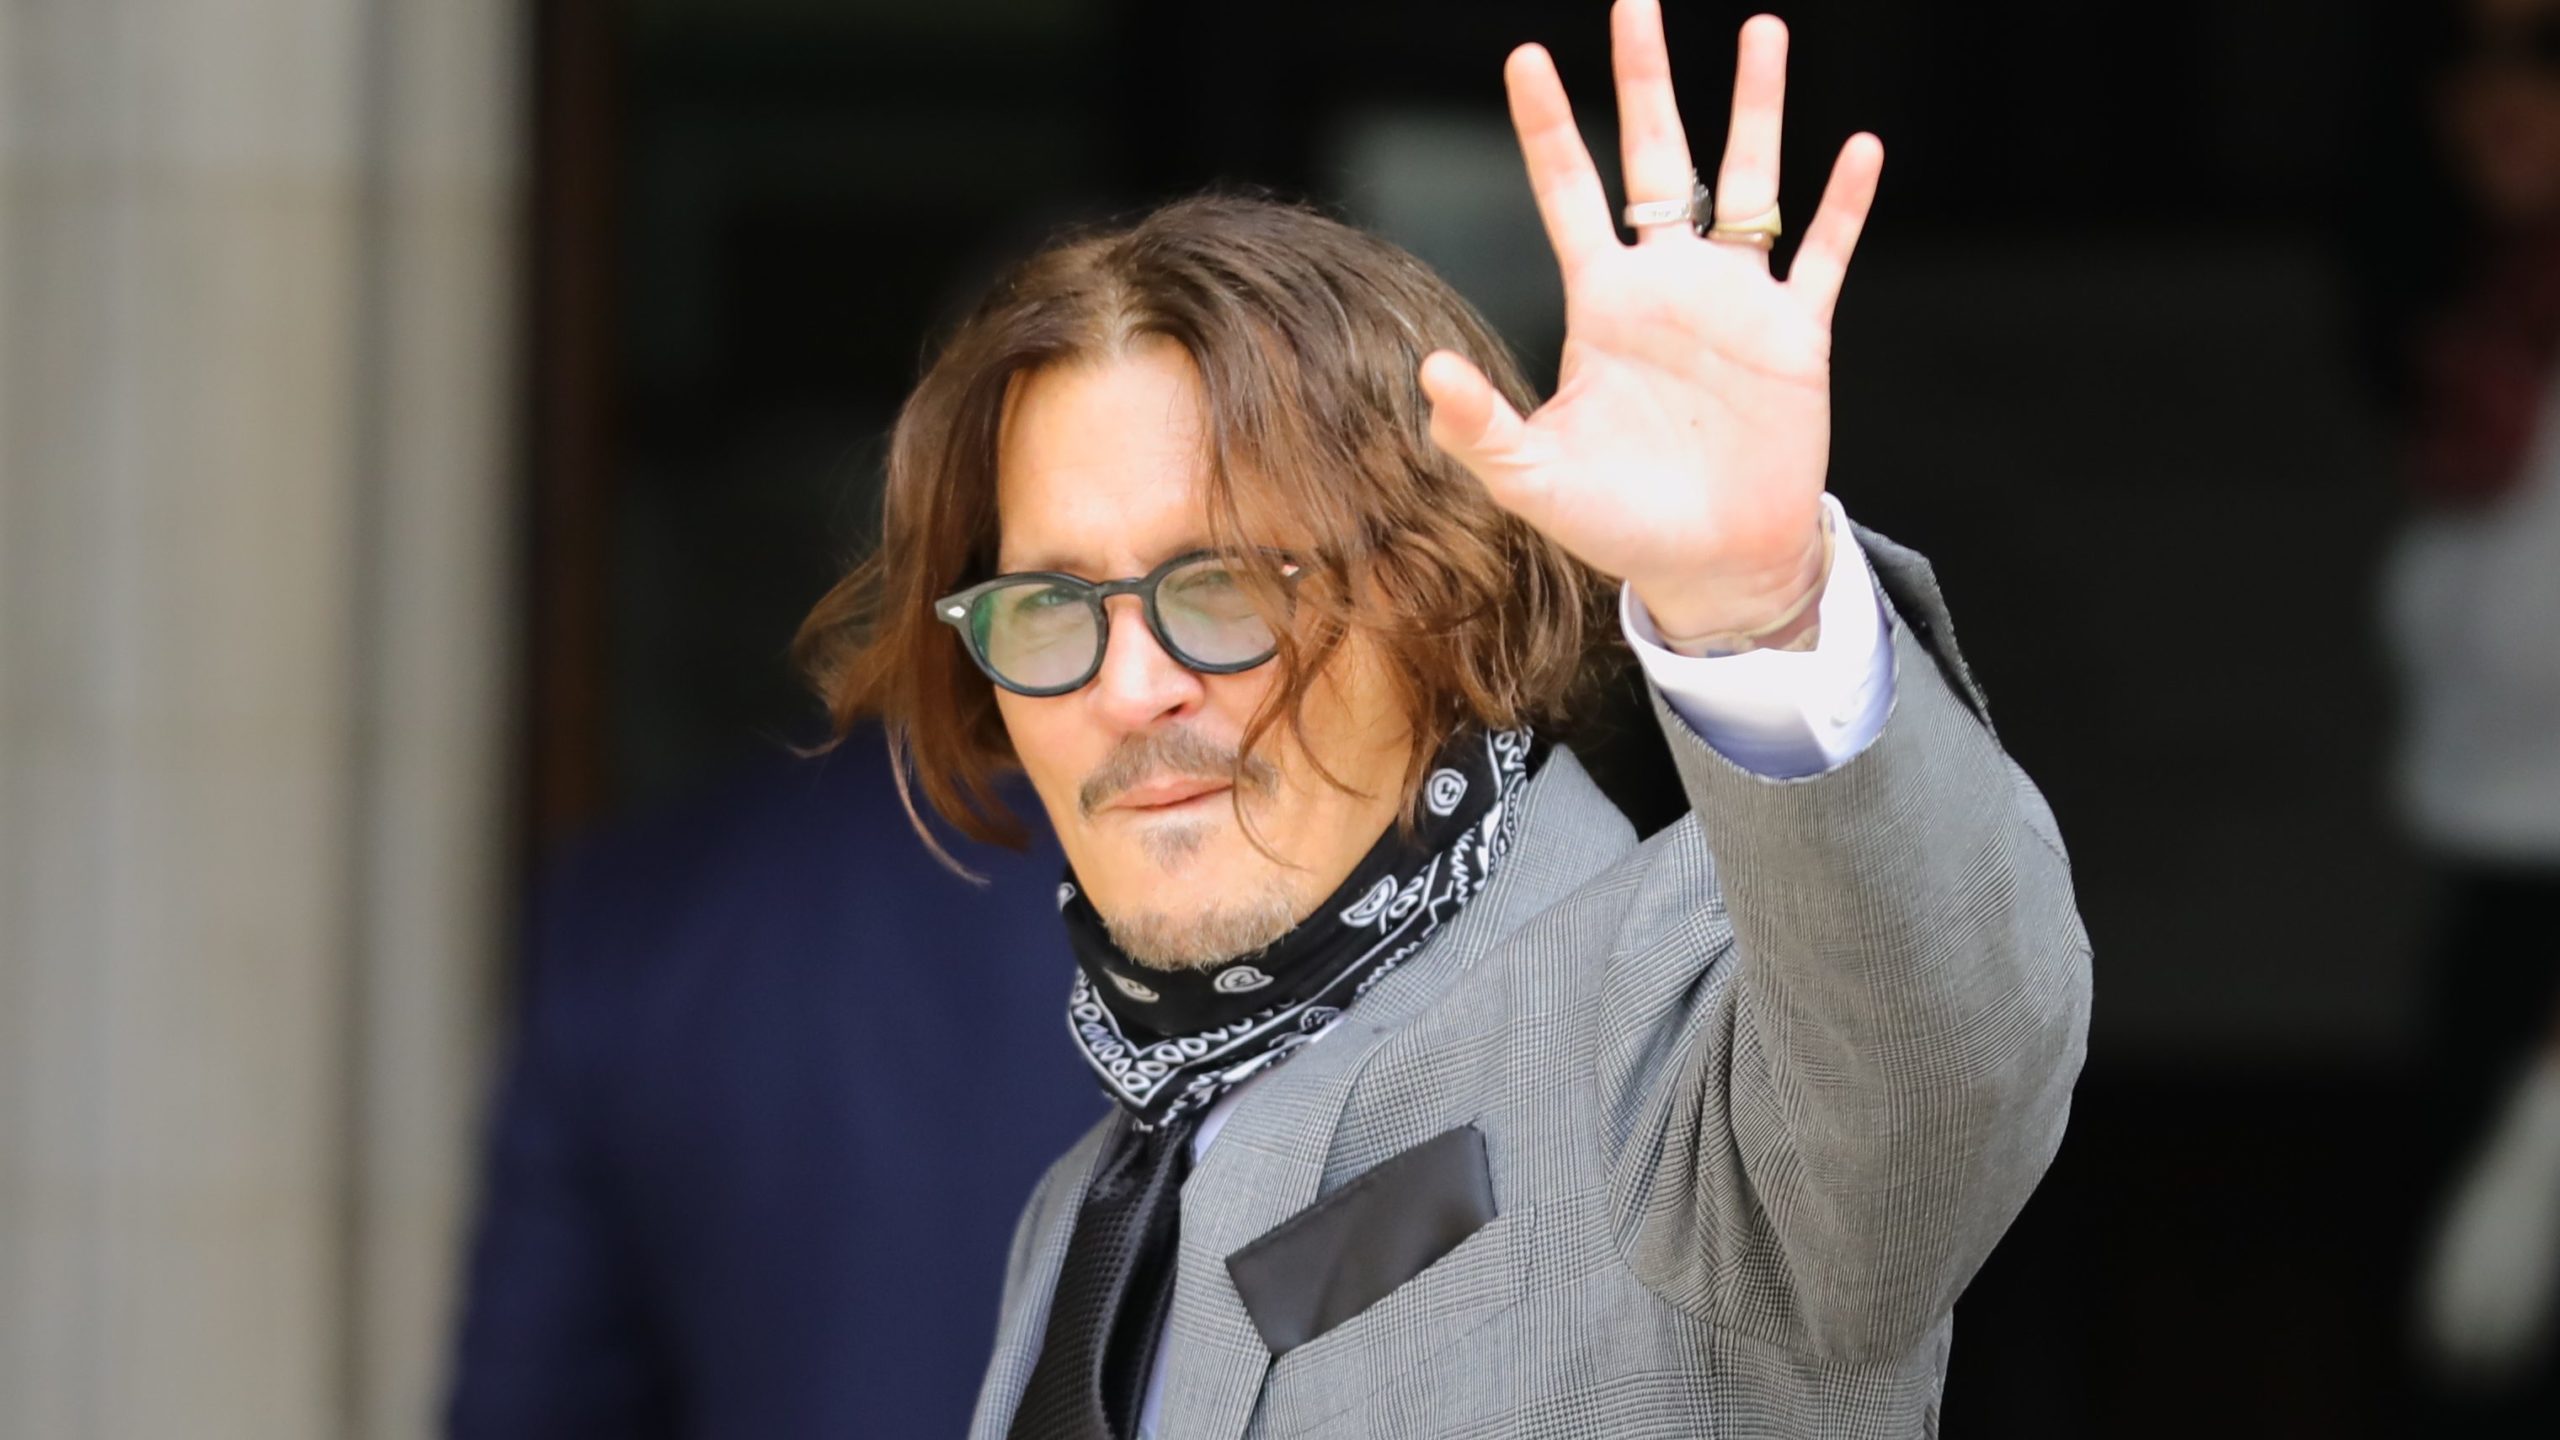 Johnny Depp Hand Injury Are Friends Concerned About Downward Spiral And Injury?